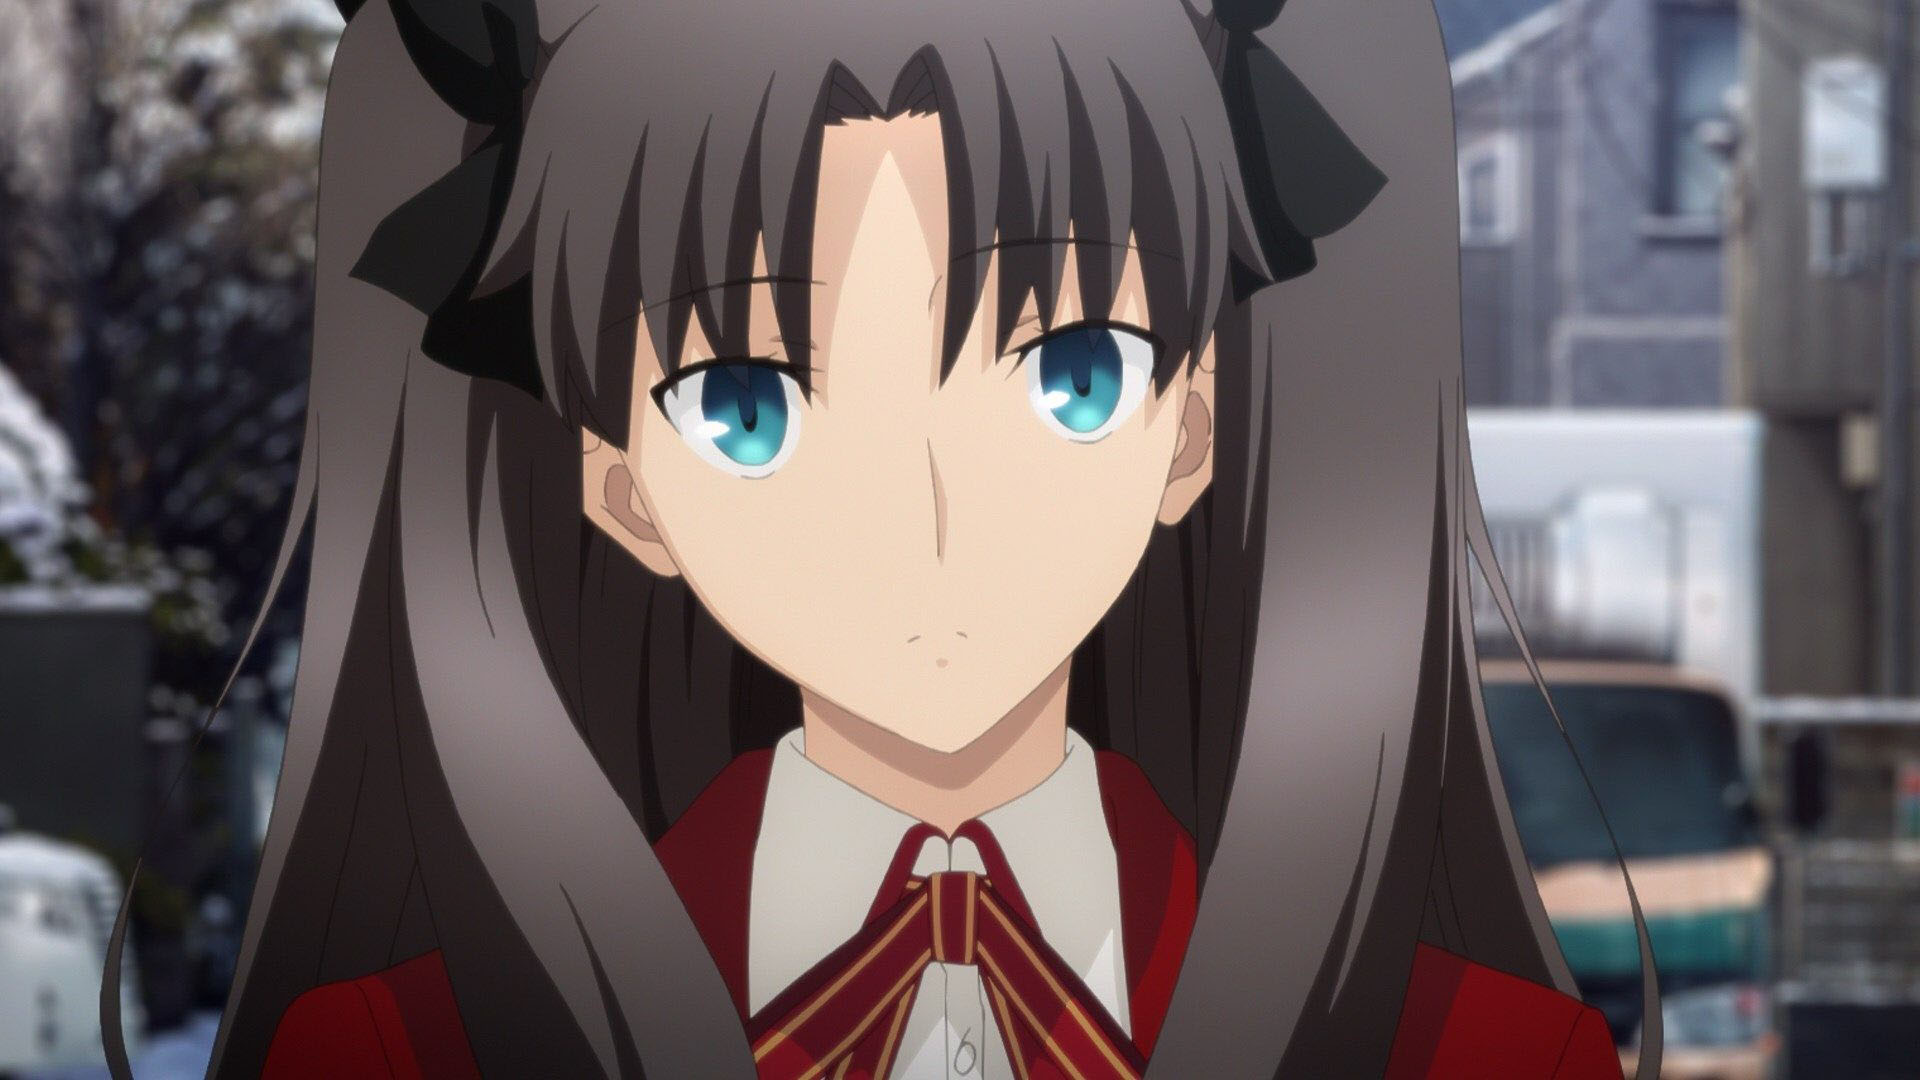 Rin Tohsaka (Japanese: ?? ?, Hepburn: T?saka Rin) is a fictional character introduced in the 2004 visual novel Fate/stay night by Type-Moon. Rin is a ...